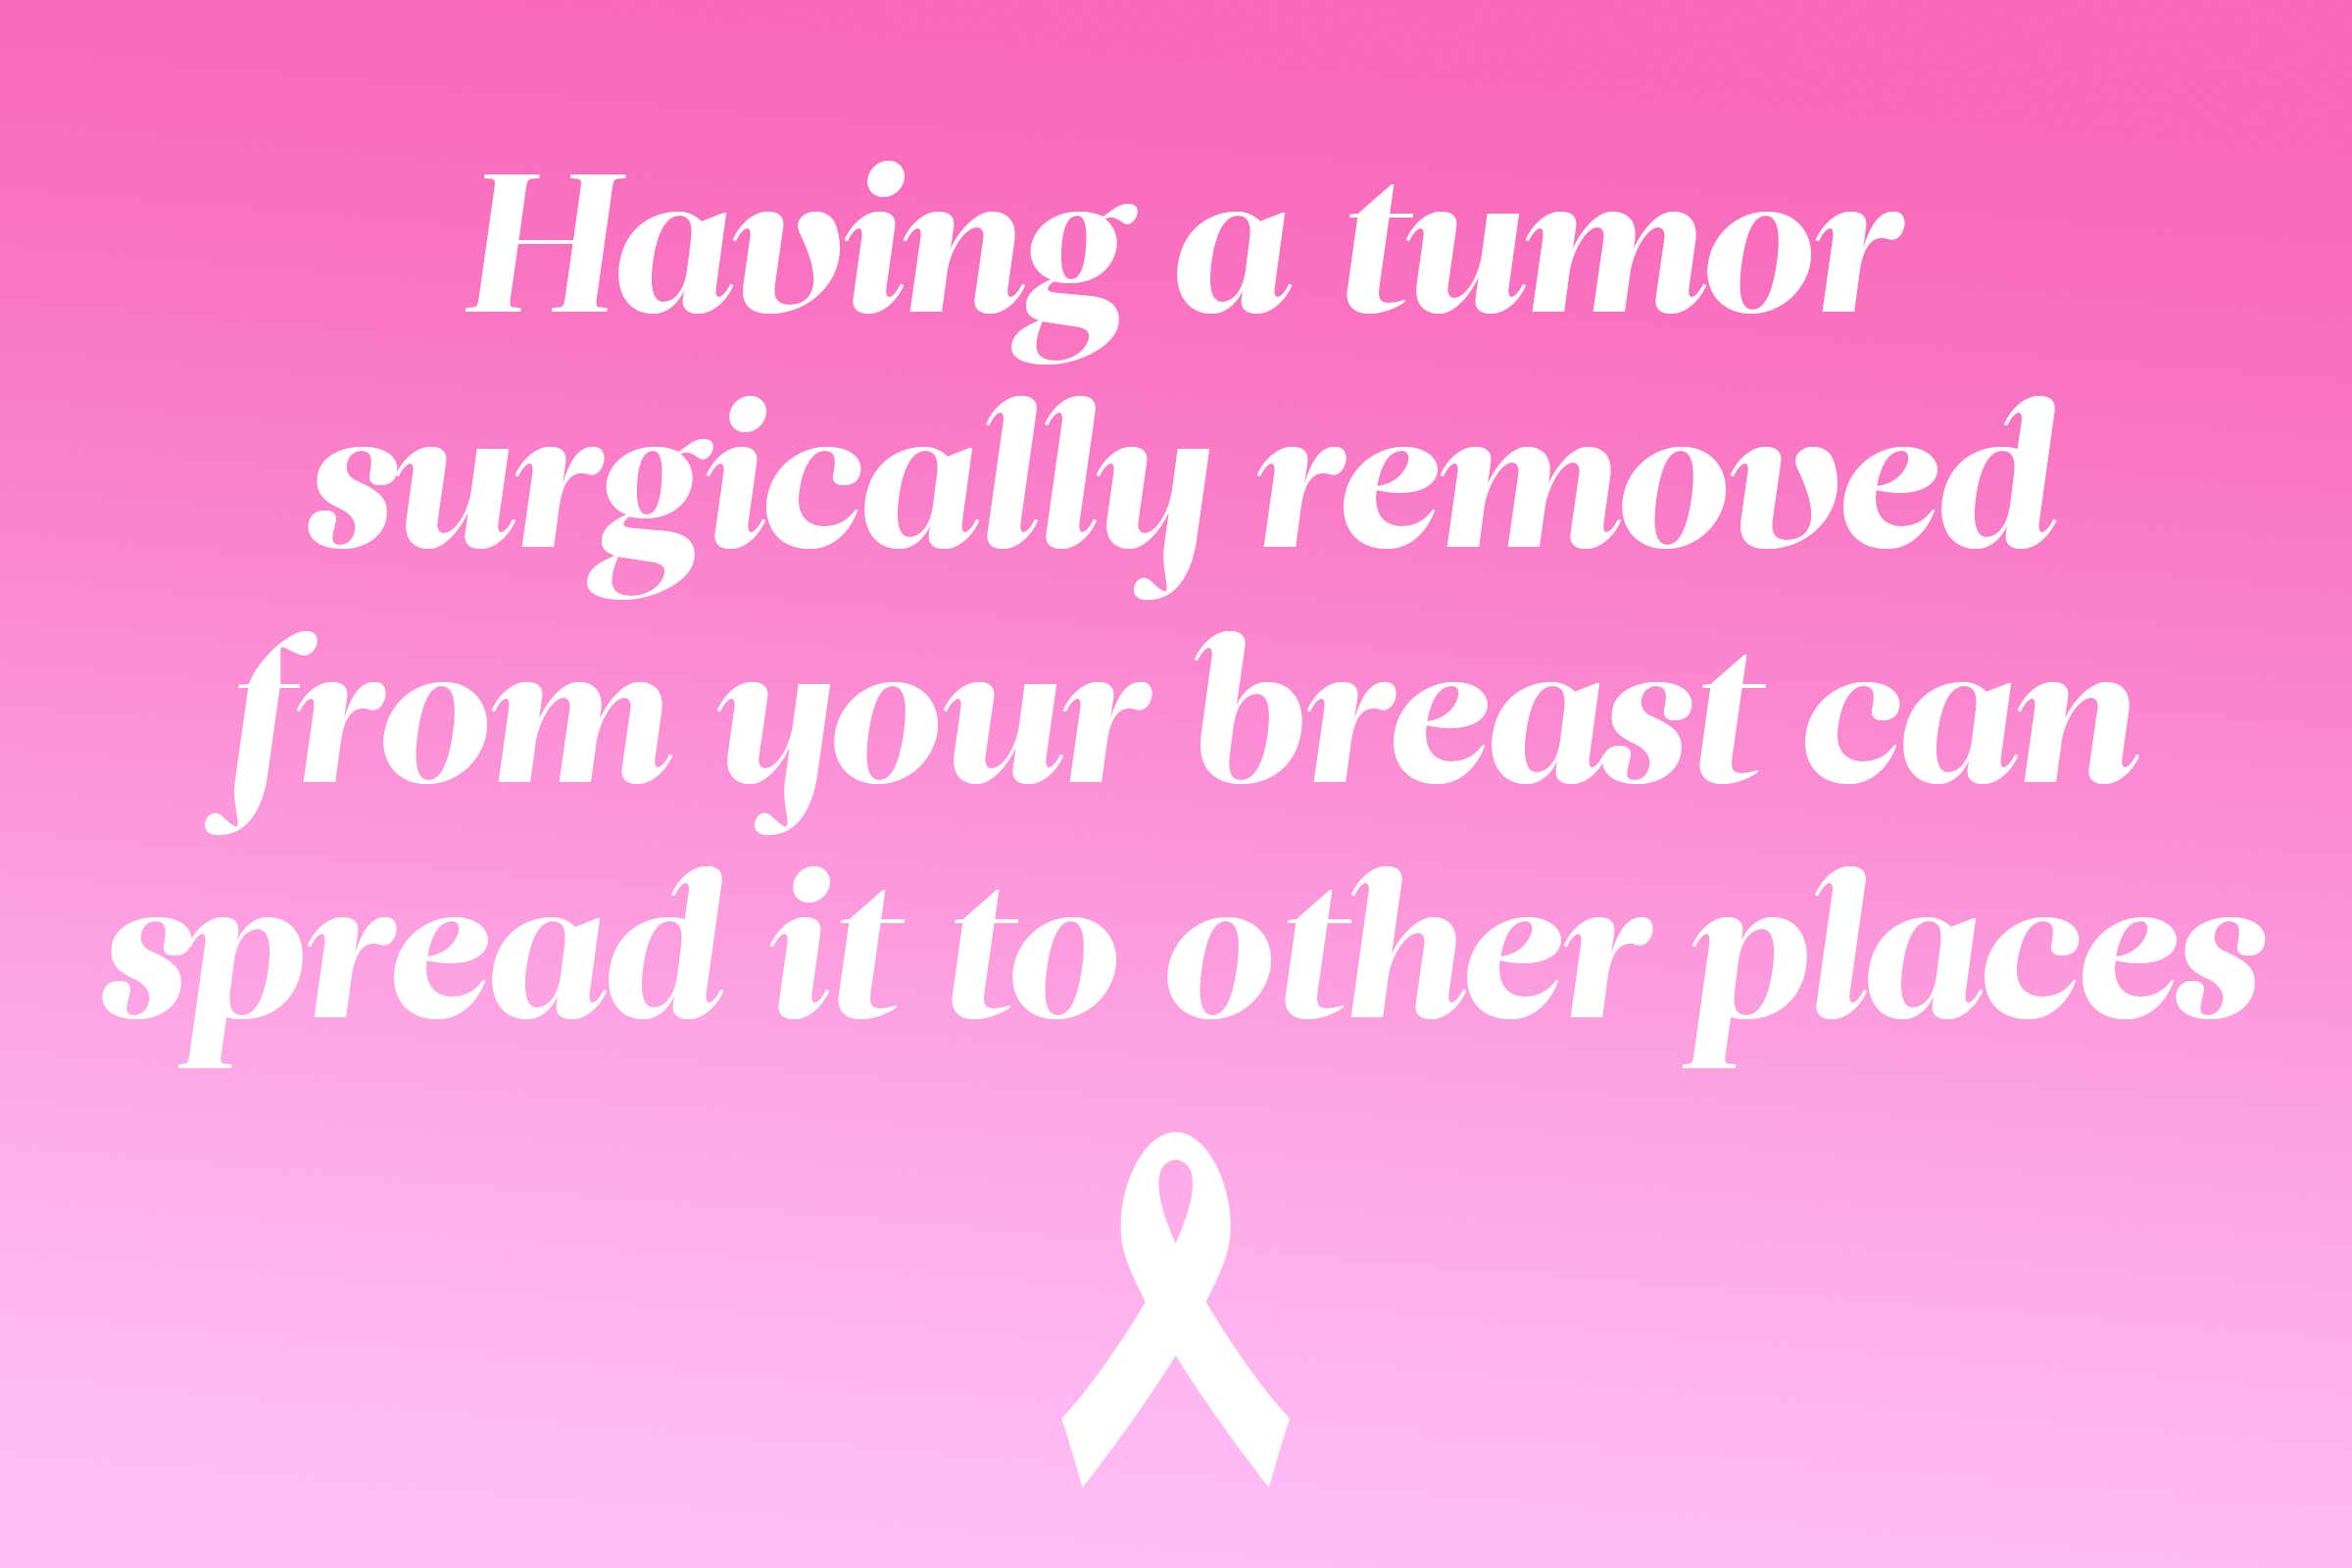 myth: tumor removal can spread cancer